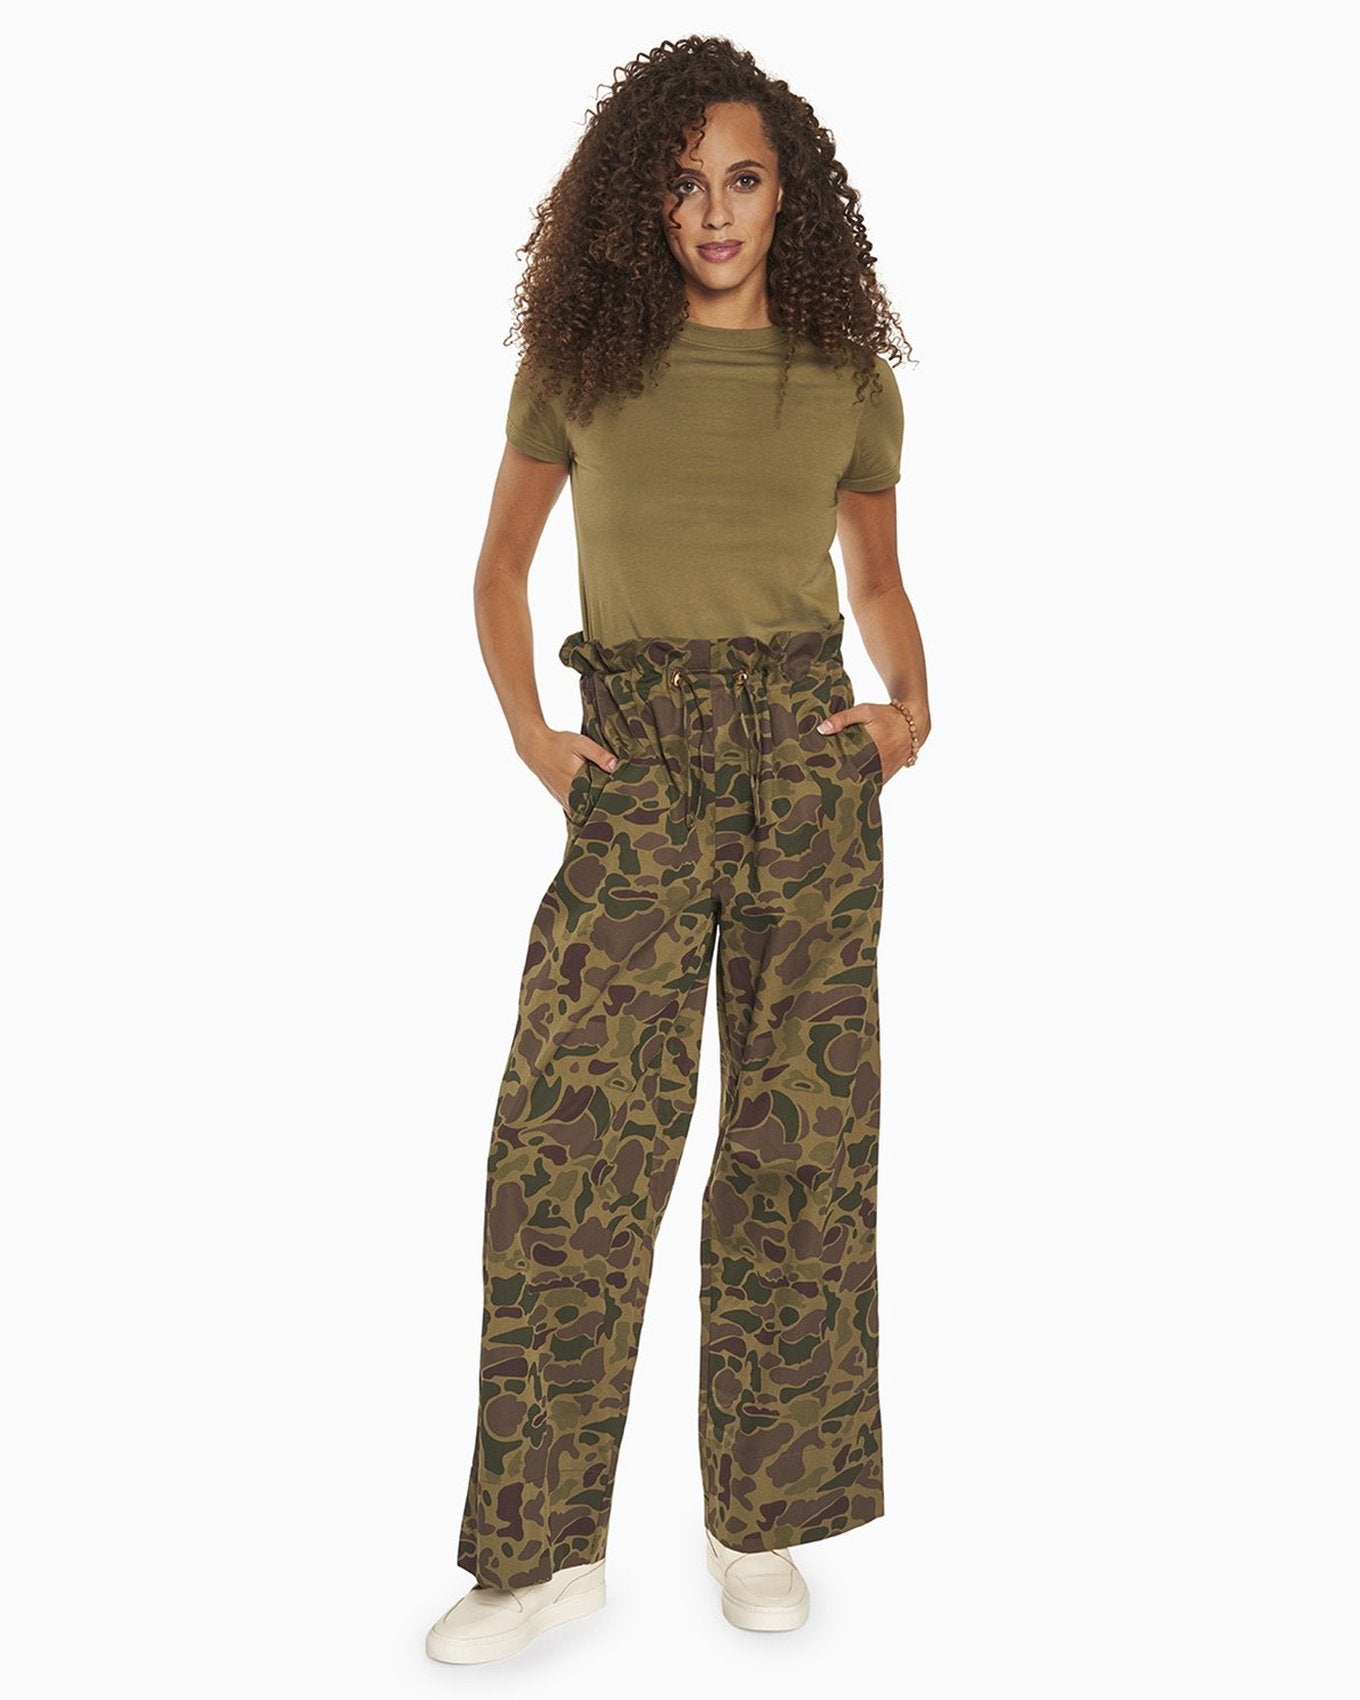 YesAnd Organic Print Paperbag Wide Leg Pant Wide Leg Pant in color Romantic Camo and shape lounge pant